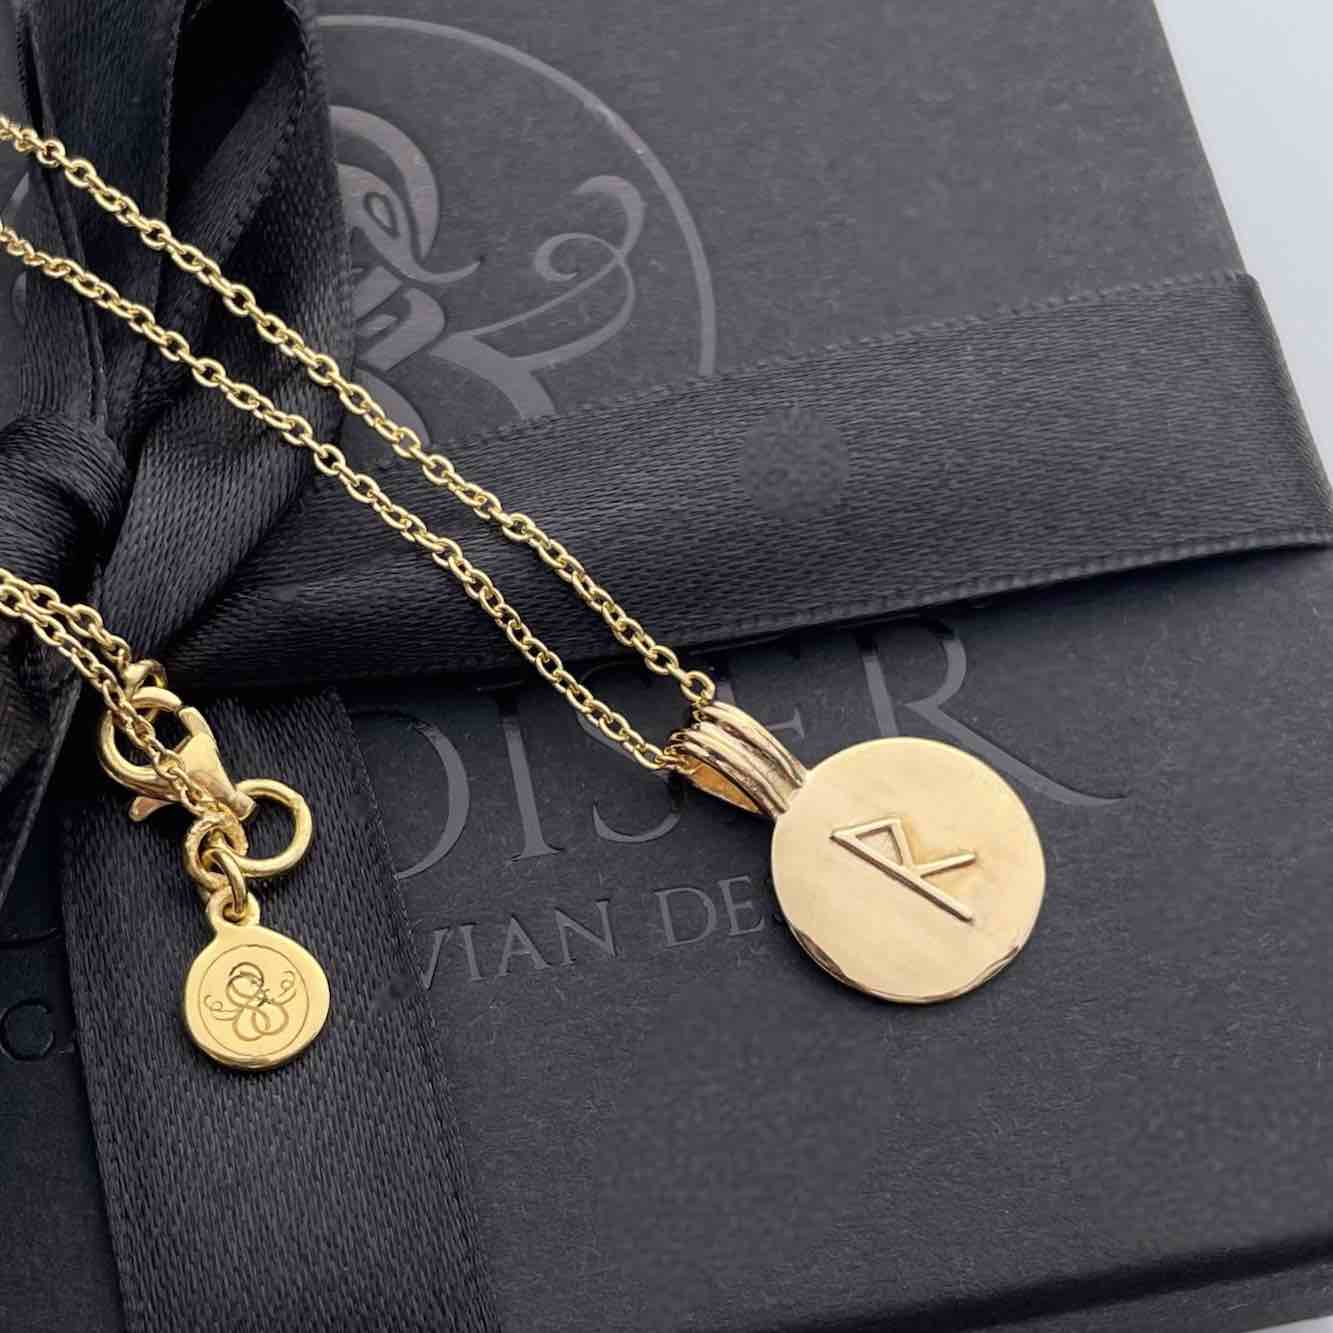 Soldiser Rune Pendant Reið Gold Necklace with Gift Box